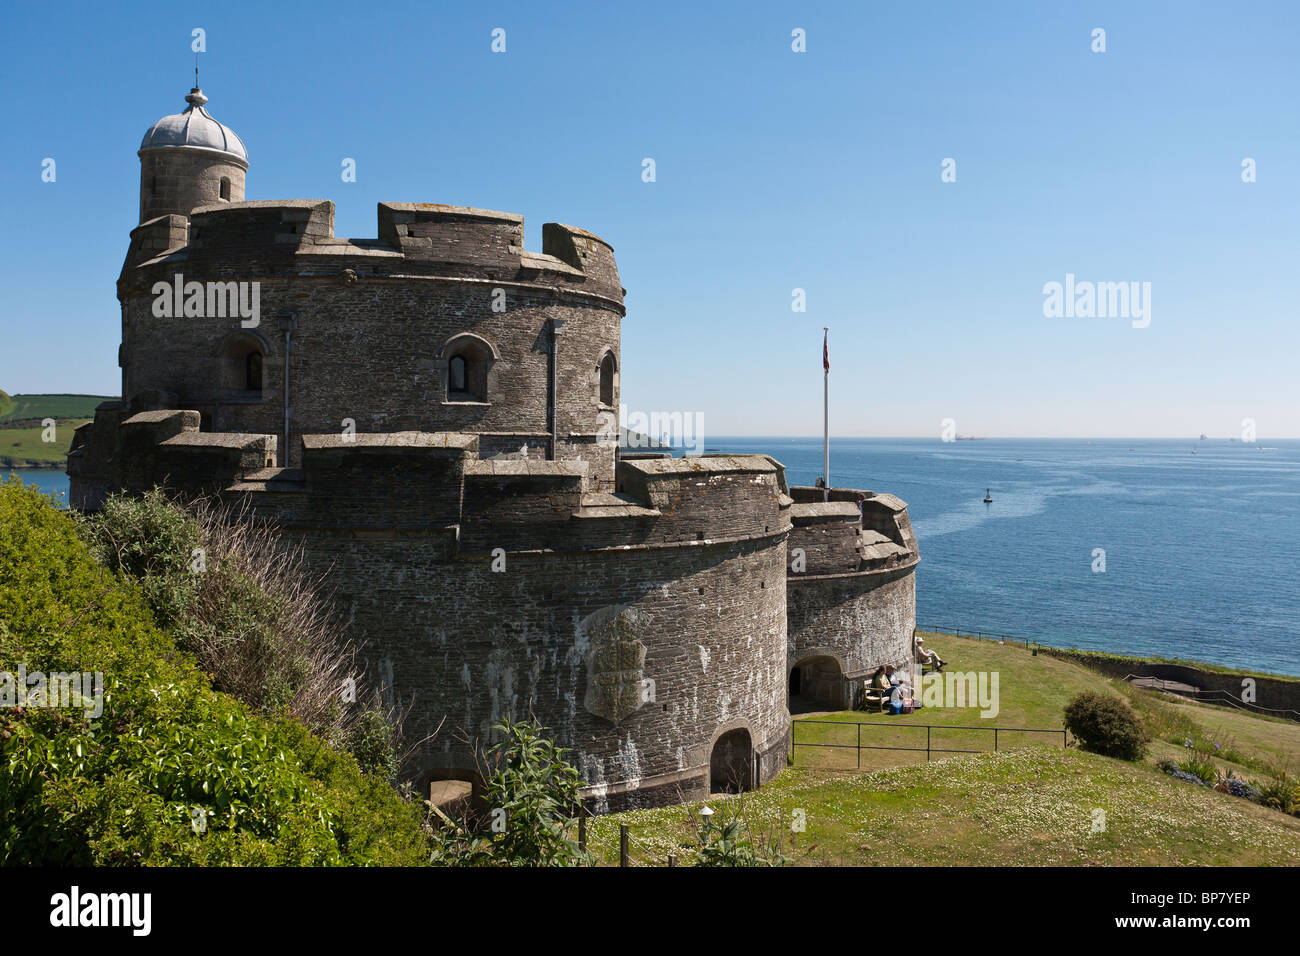 St Mawes Castle. The old stone fortress of St Mawes was built by Henry VIII to guard the entrance to Falmouth harbour. Stock Photo